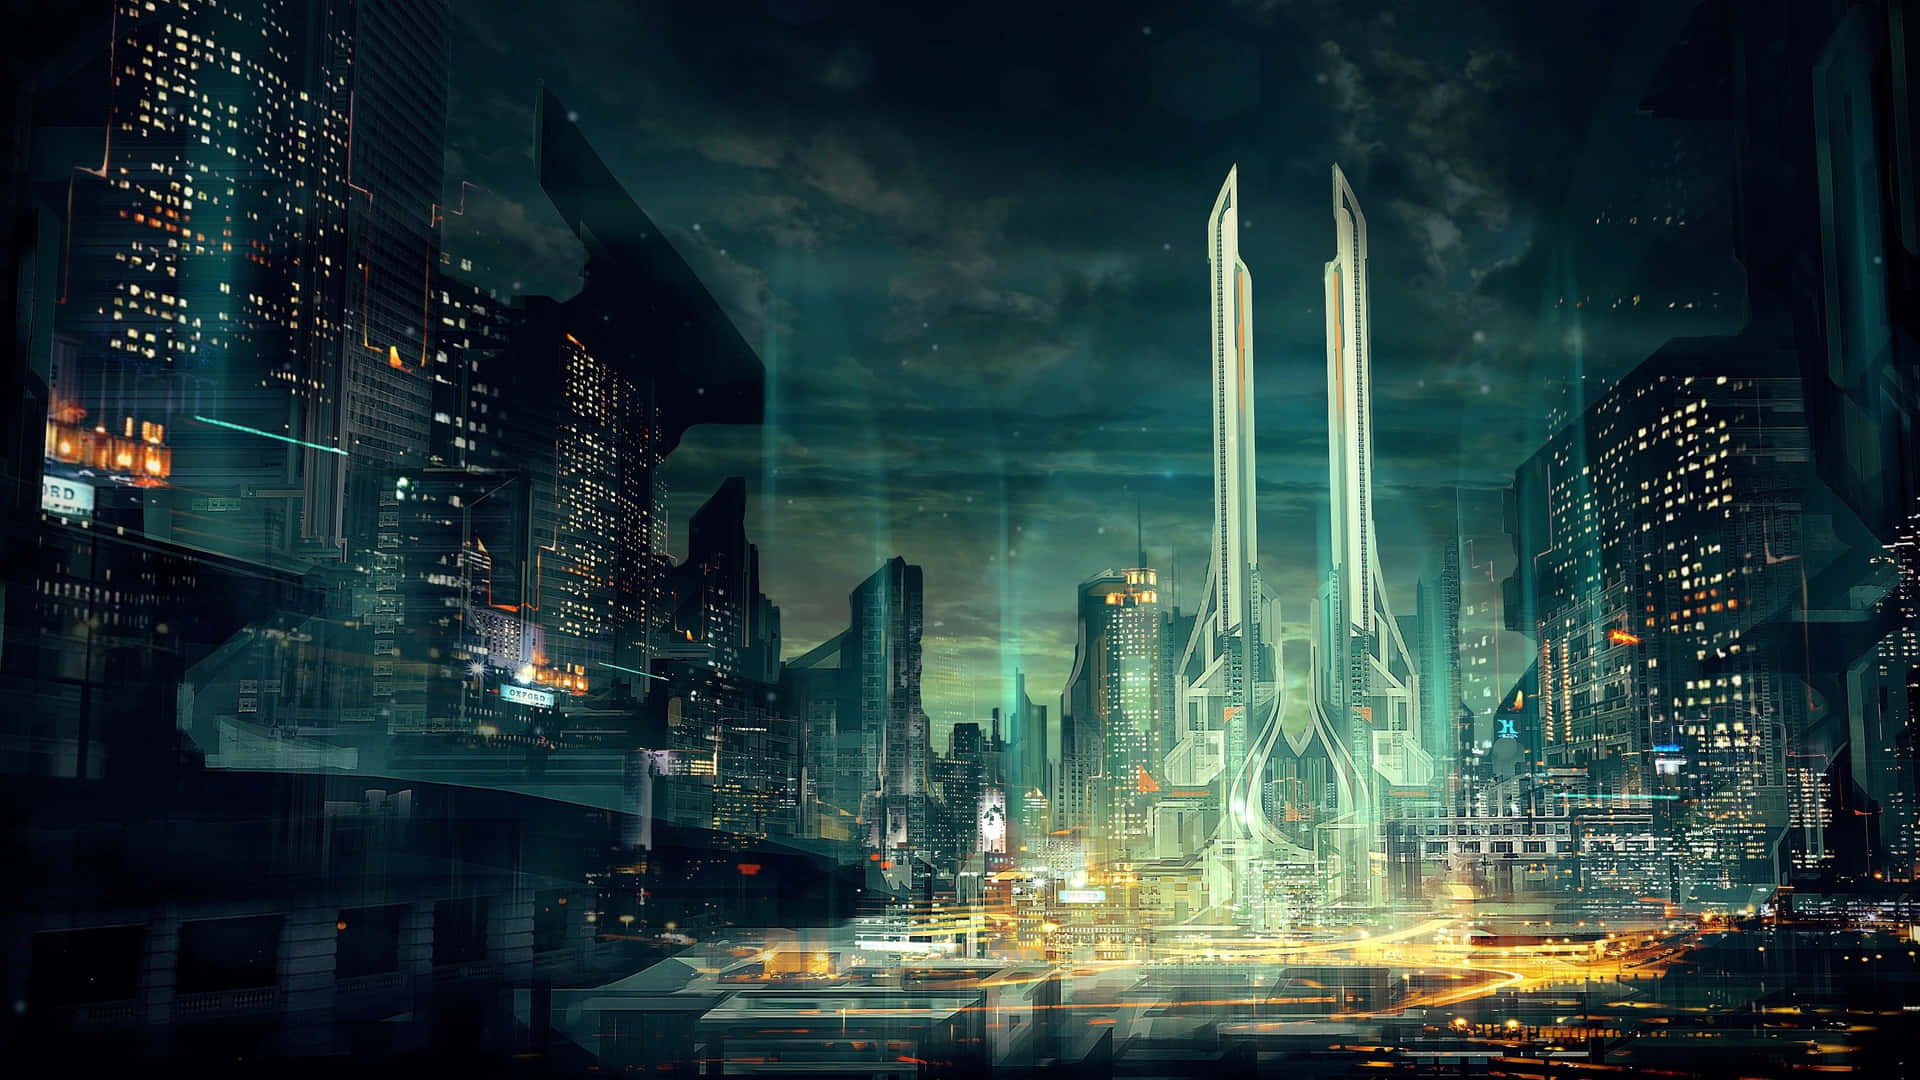 Witness the Future with a View of a Futuristic City